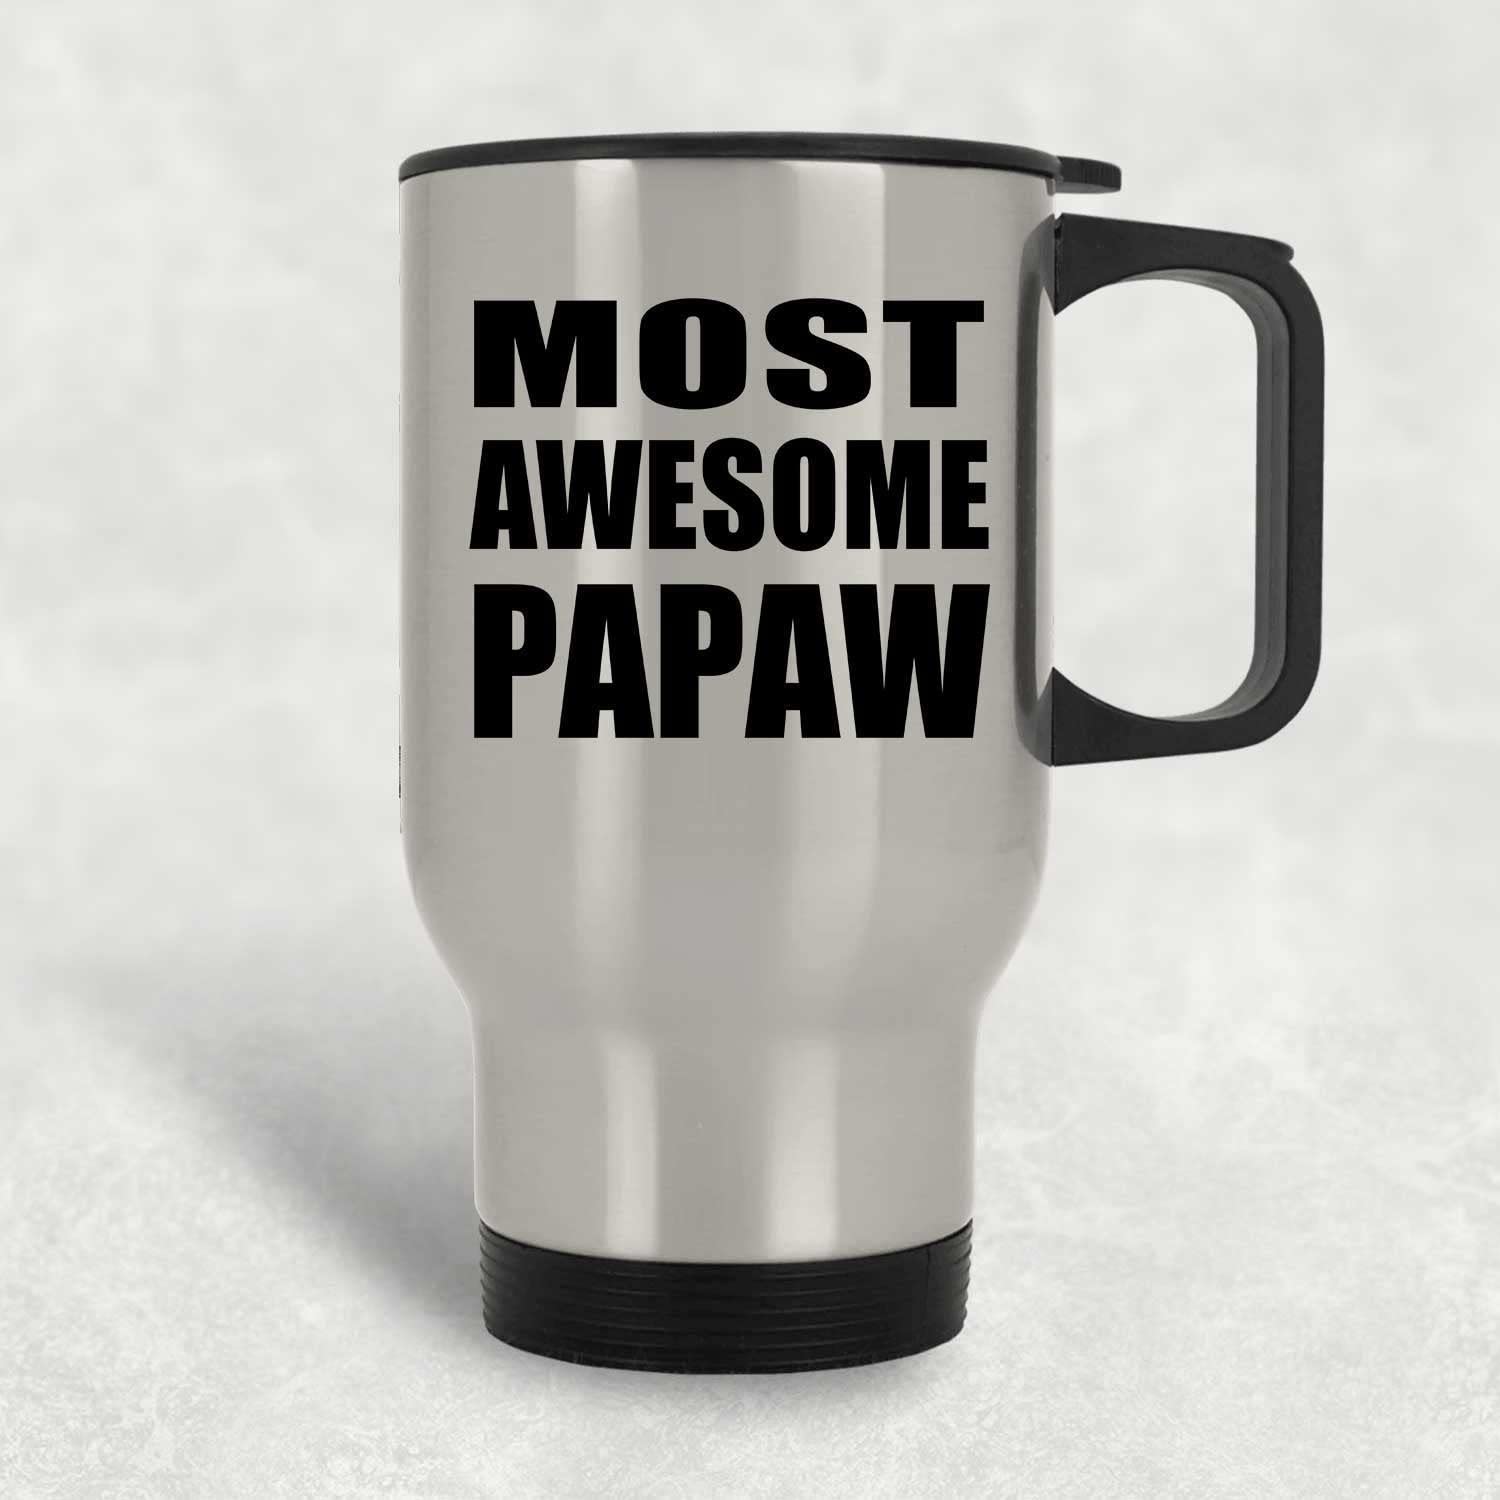 Designsify Gifts, Most Awesome Papaw, Silver Travel Mug 14oz Stainless Steel Insulated Tumbler, for Birthday Anniversary Valentines Day Mothers Fathers Day Party, to Men Women Him Her Friend Mom Dad